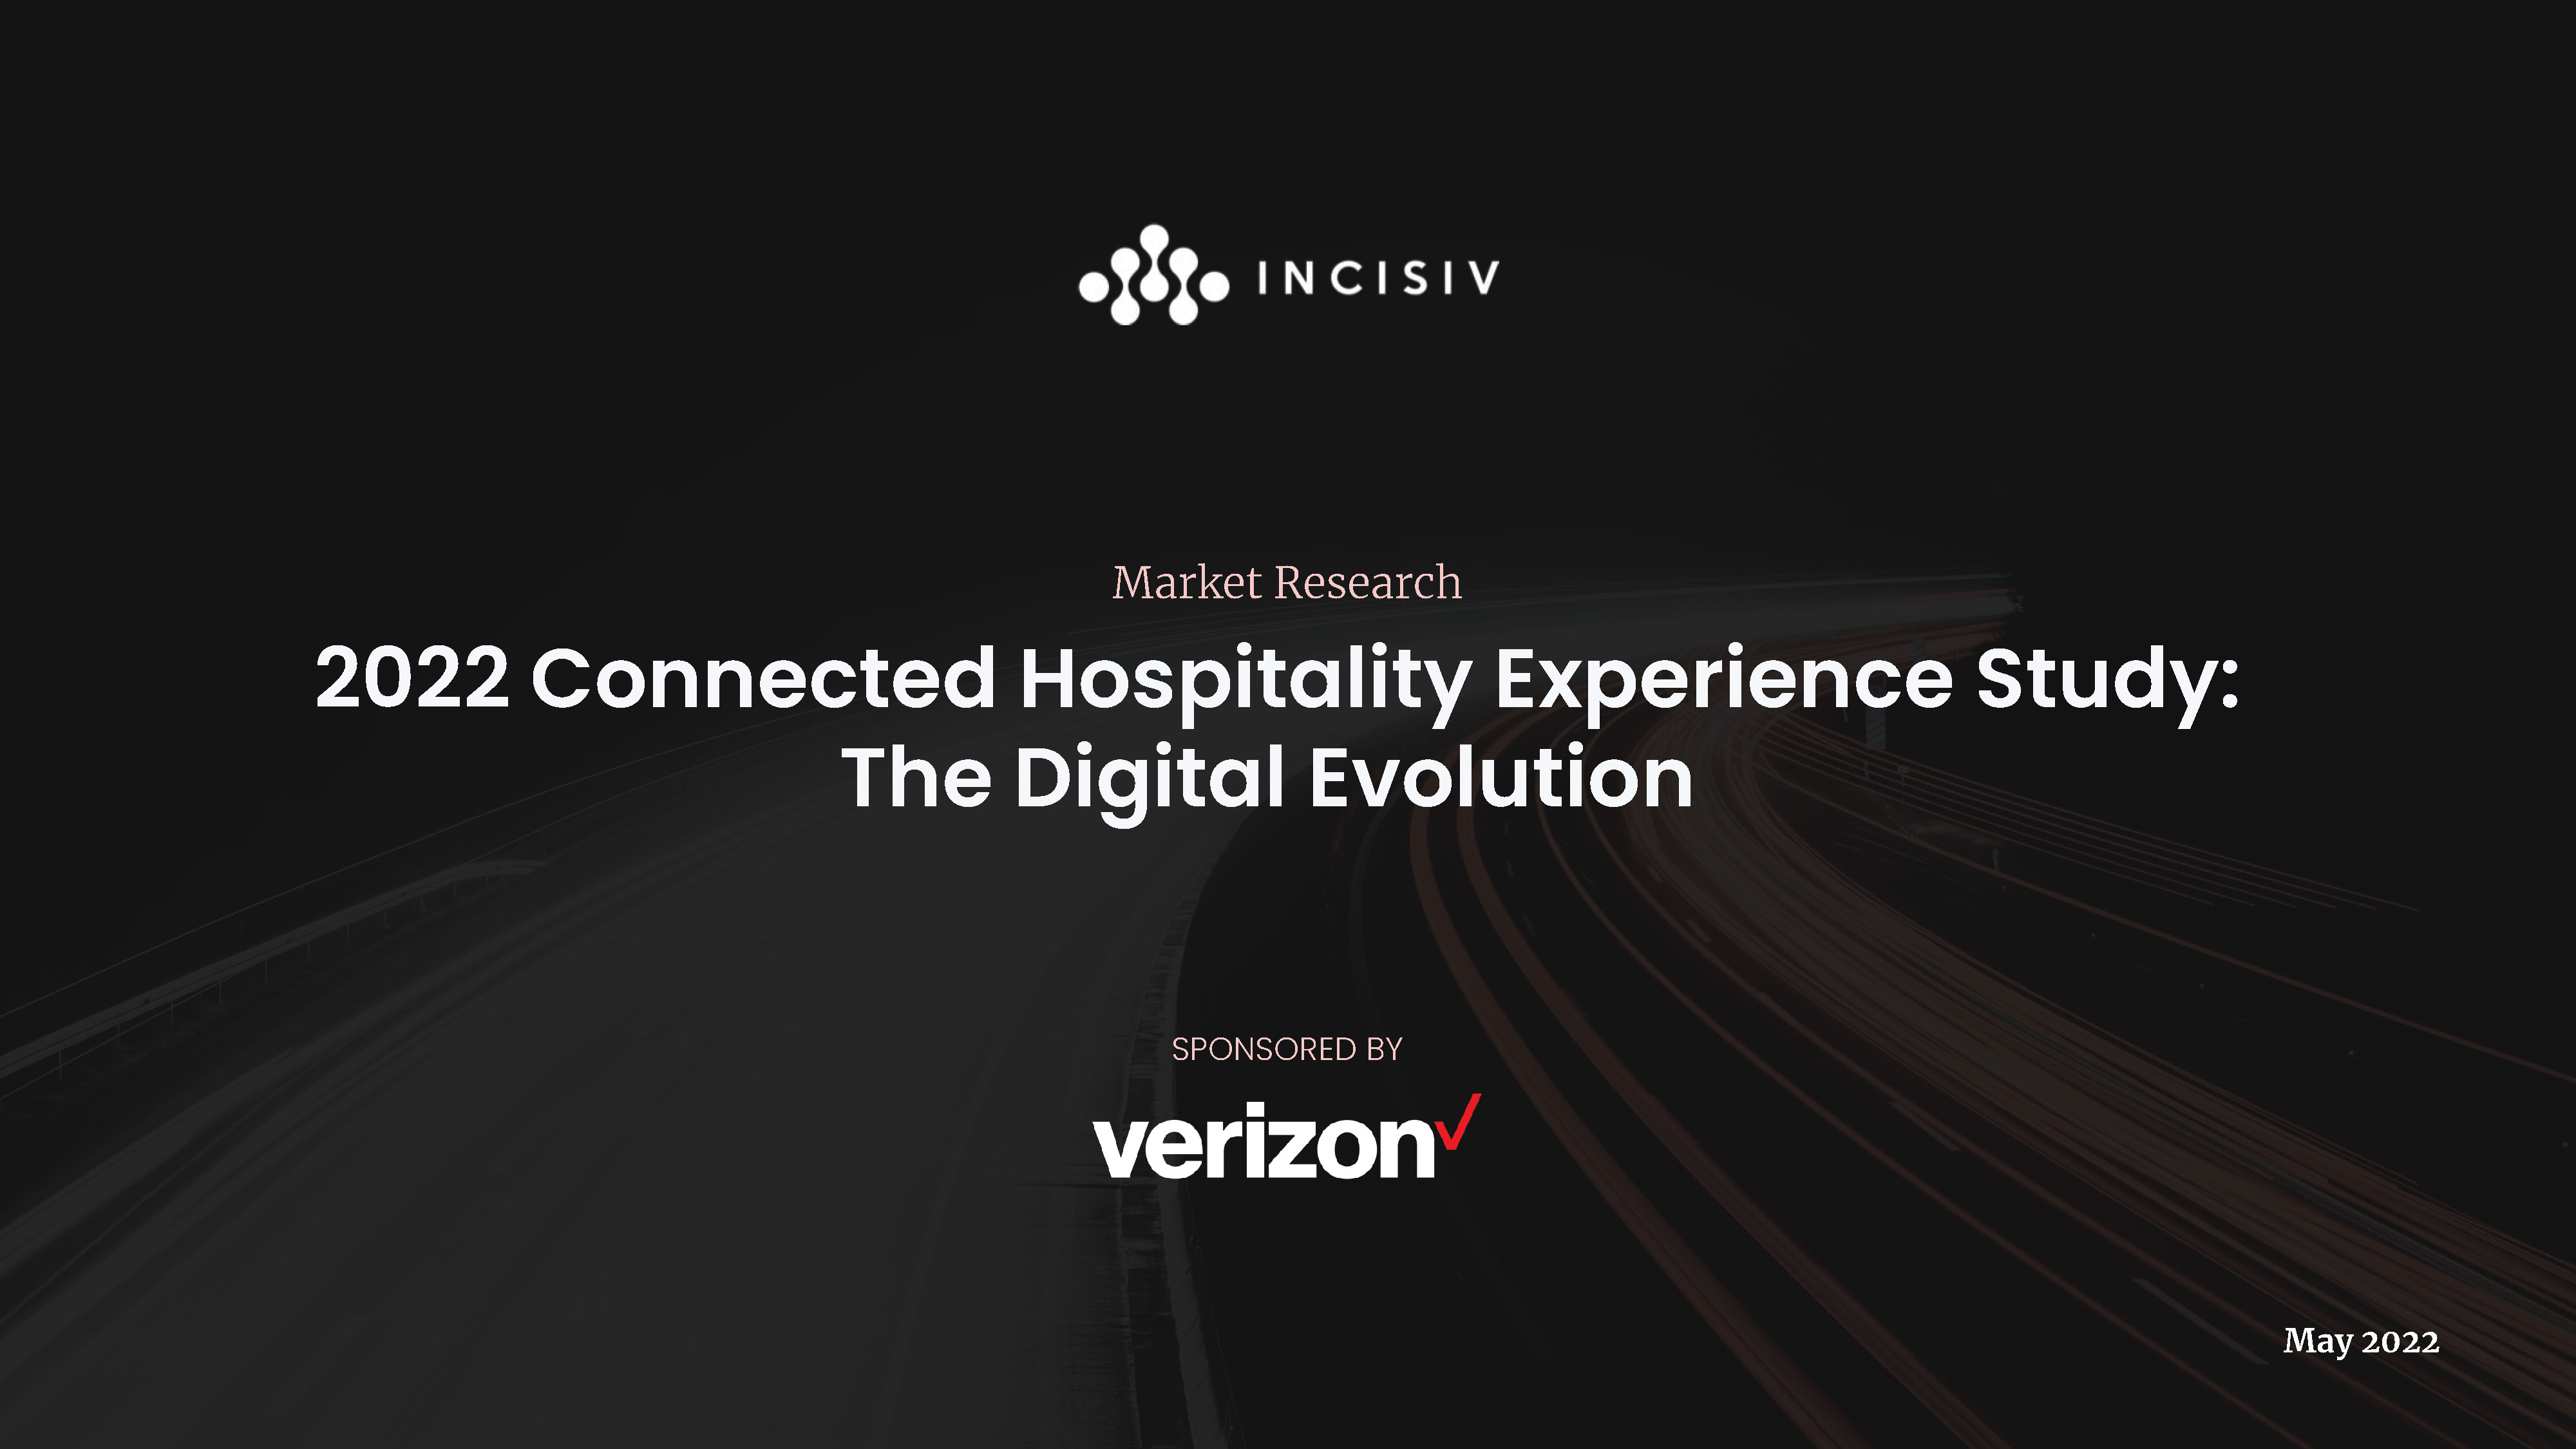 2022 Connected Hospitality Experience Study: The Digital Evolution